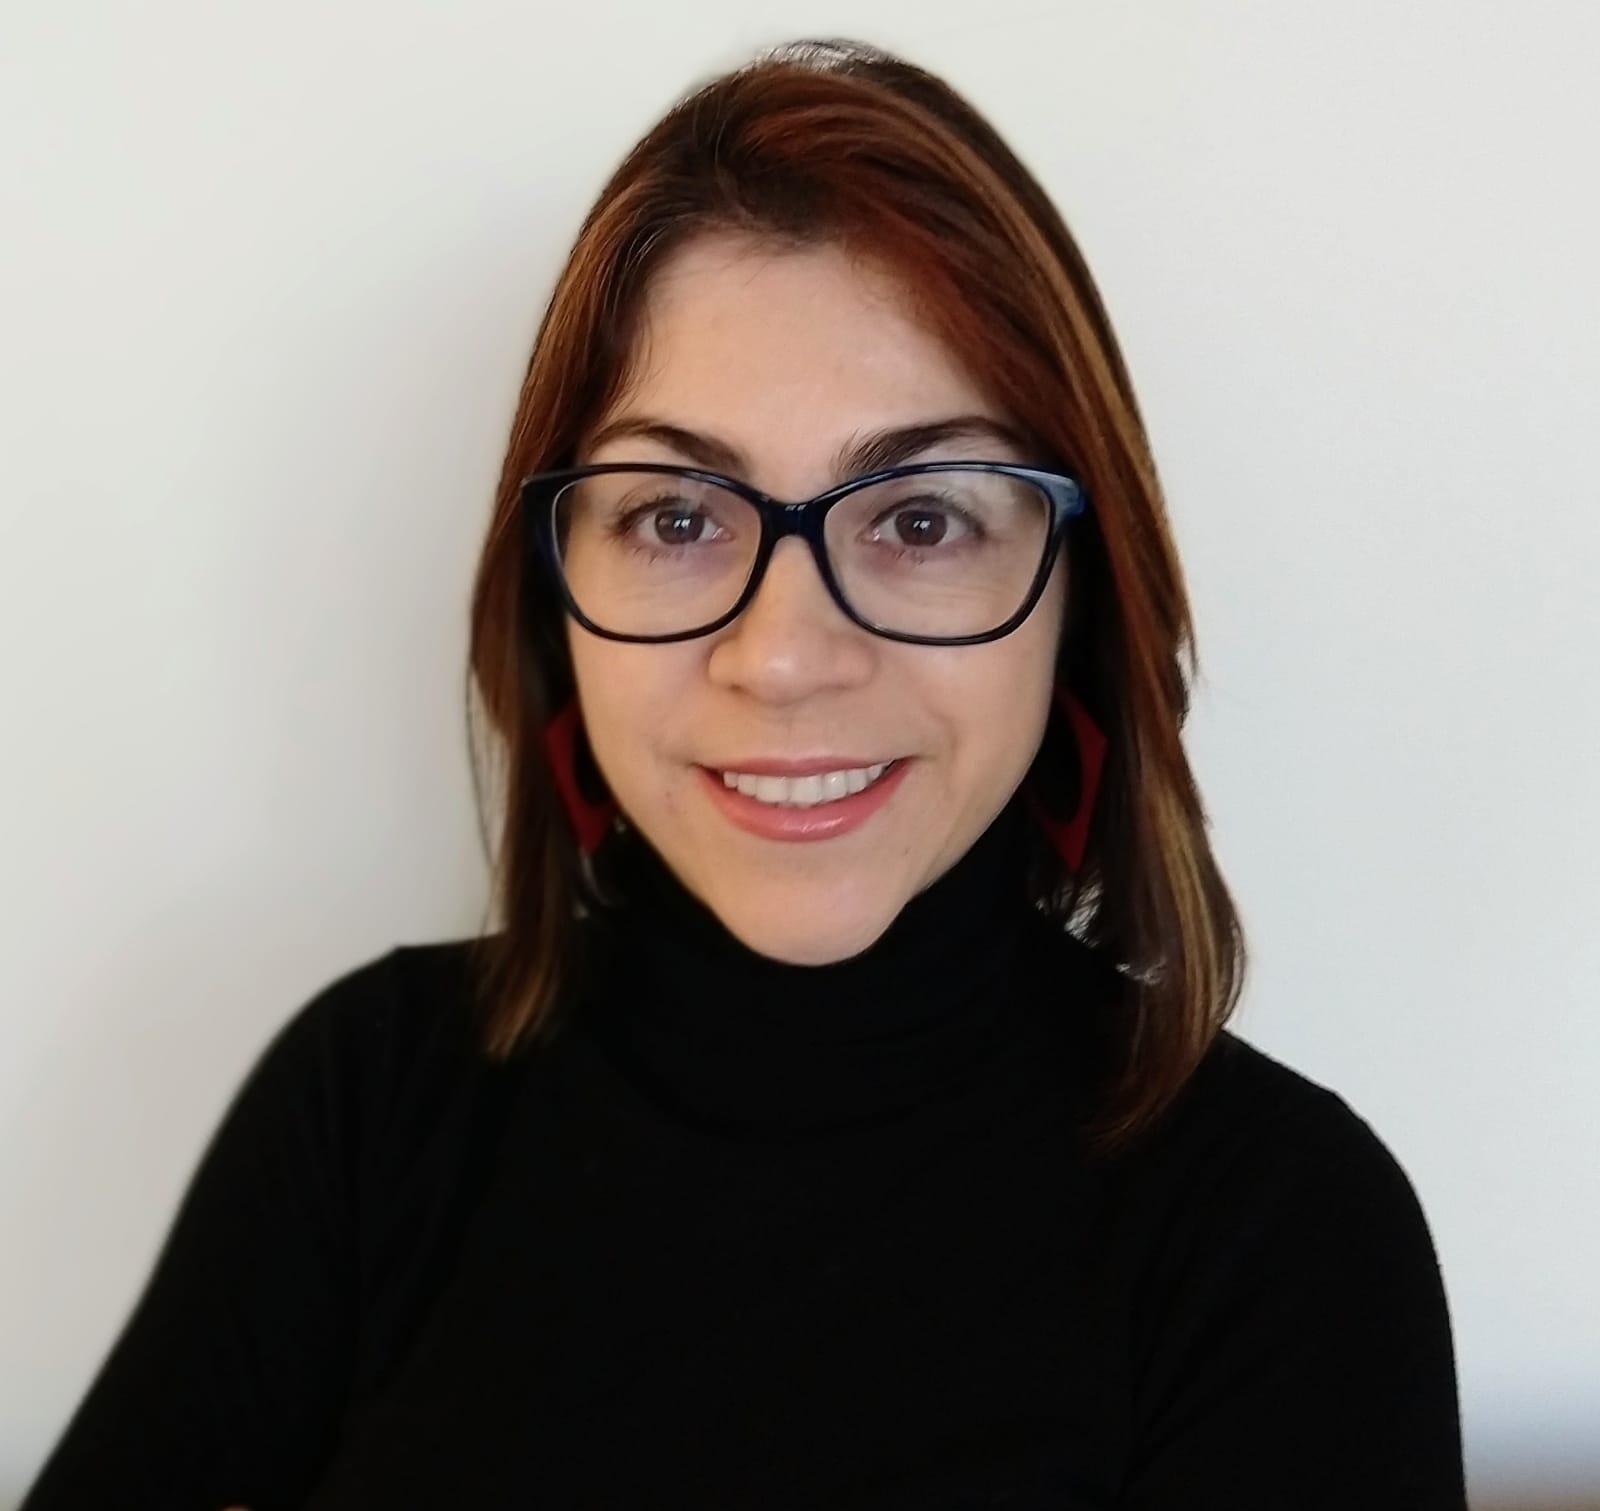 Head shot image of Paola Roldan, who is smiling and wearing glasses.